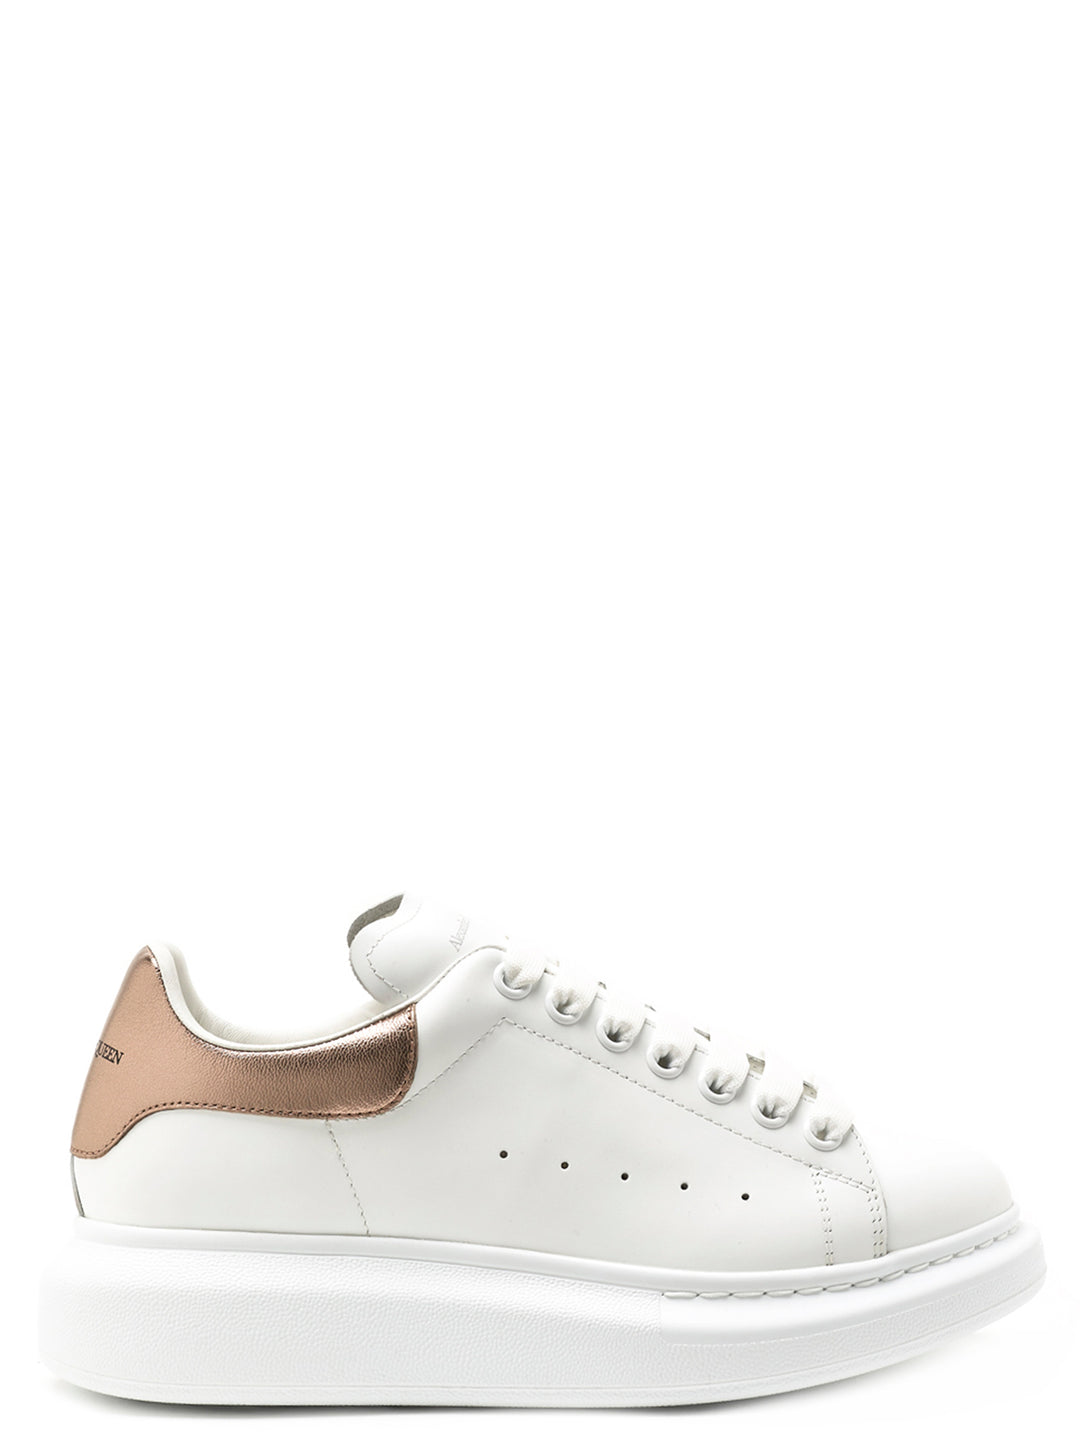 'Oversize sole’ Sneakers Rosa